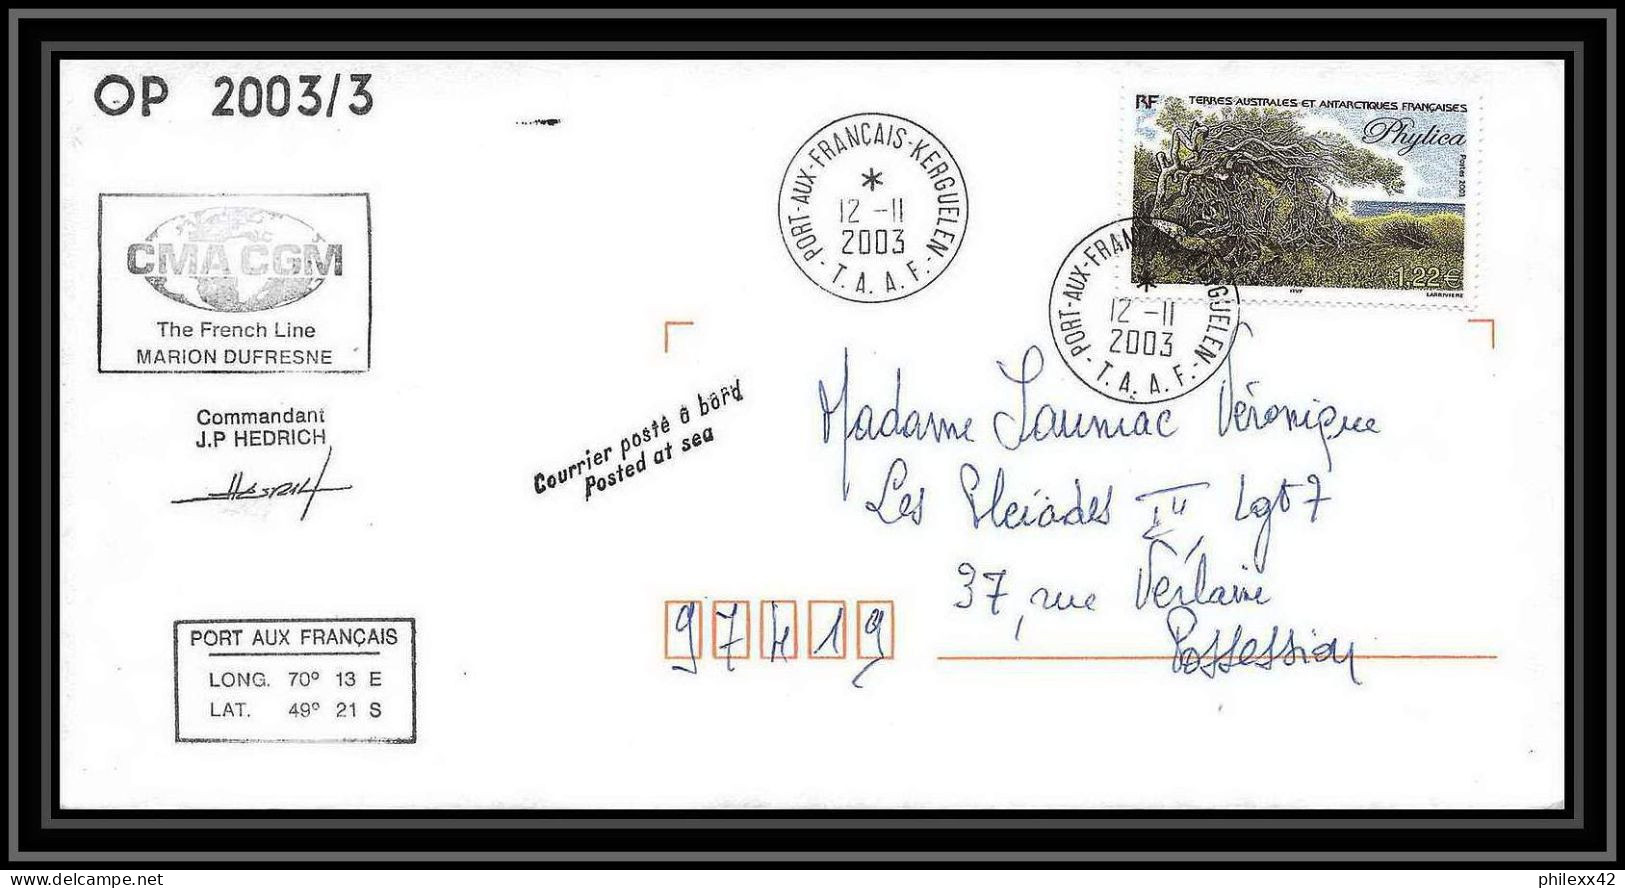 2416 Dufresne 2 Signé Signed Op 2003/3 N°363 12/11/2003 ANTARCTIC Terres Australes (taaf) Lettre Cover - Covers & Documents